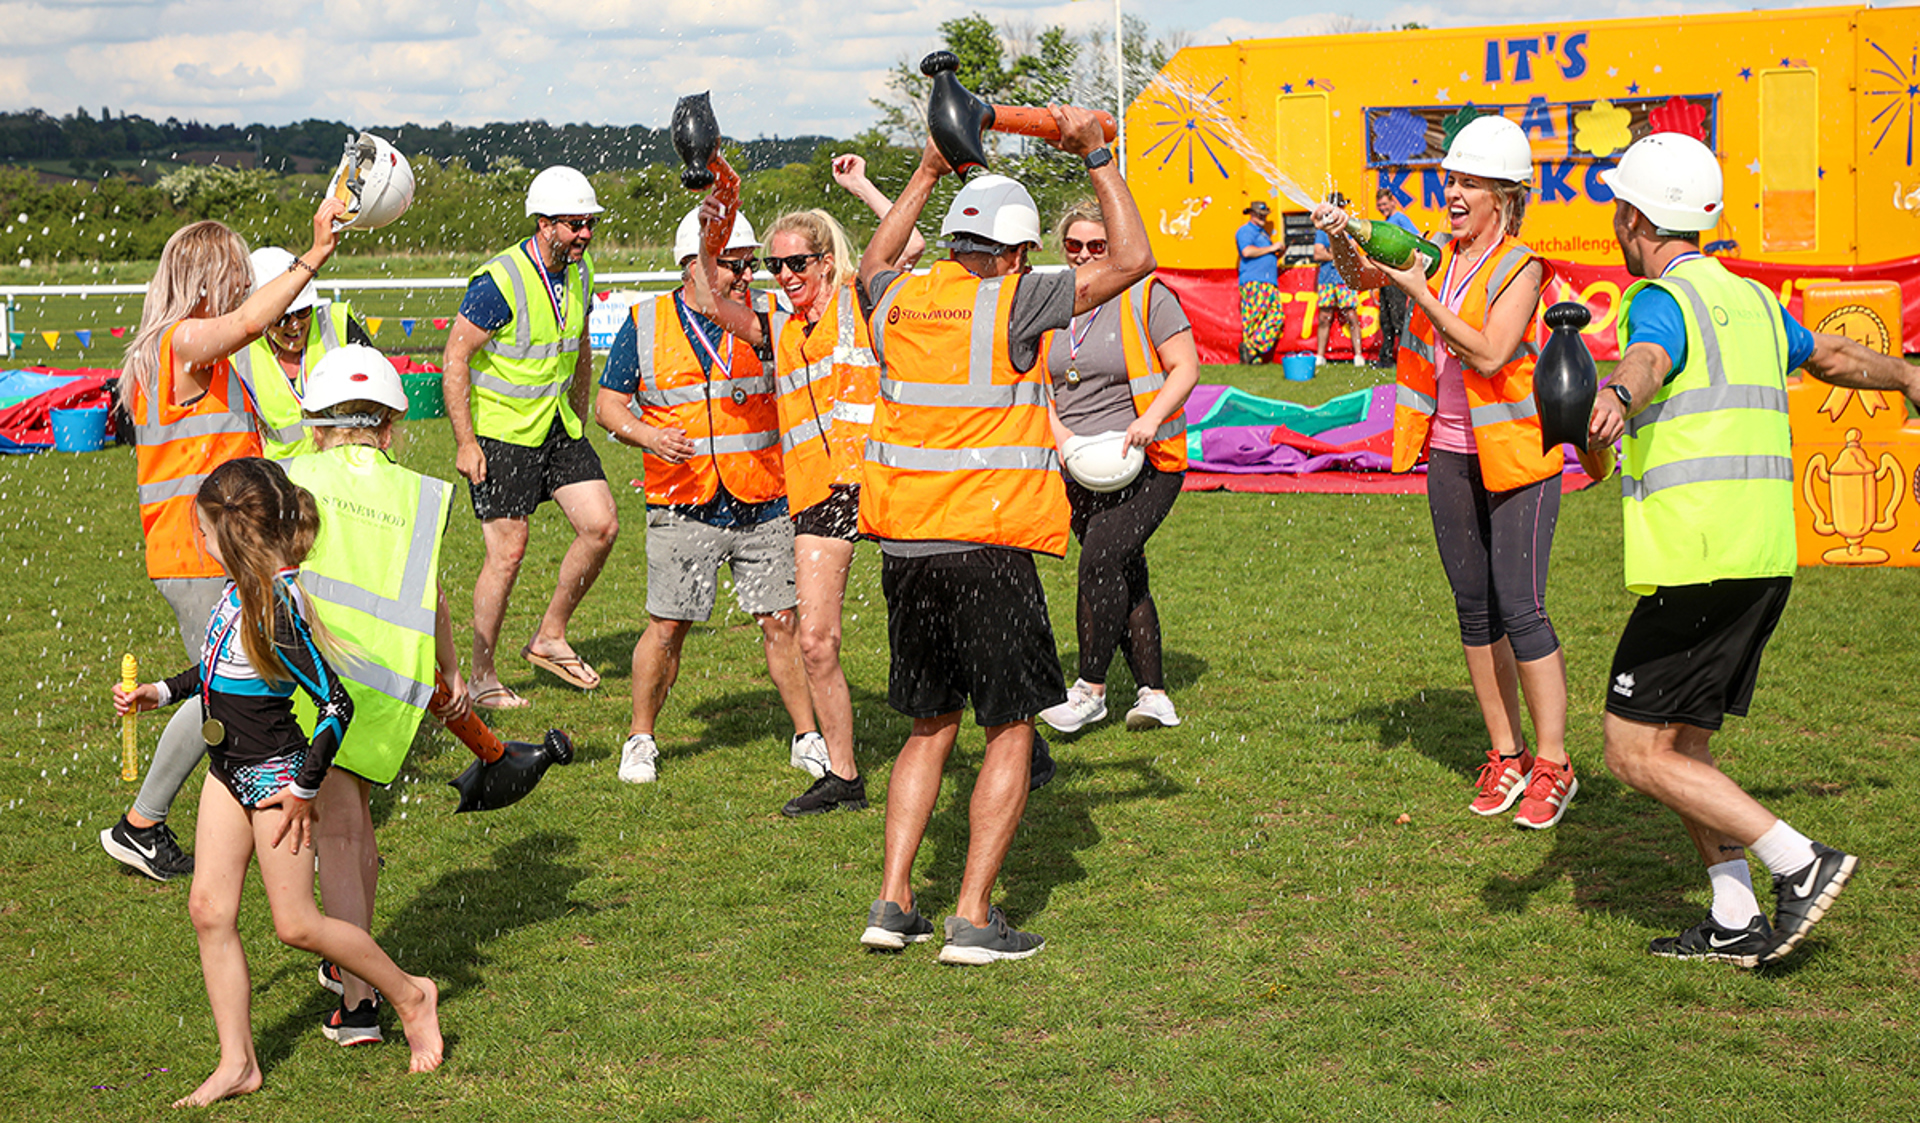 A group of supporters celebrating their win at It's a Knockout event with champagne